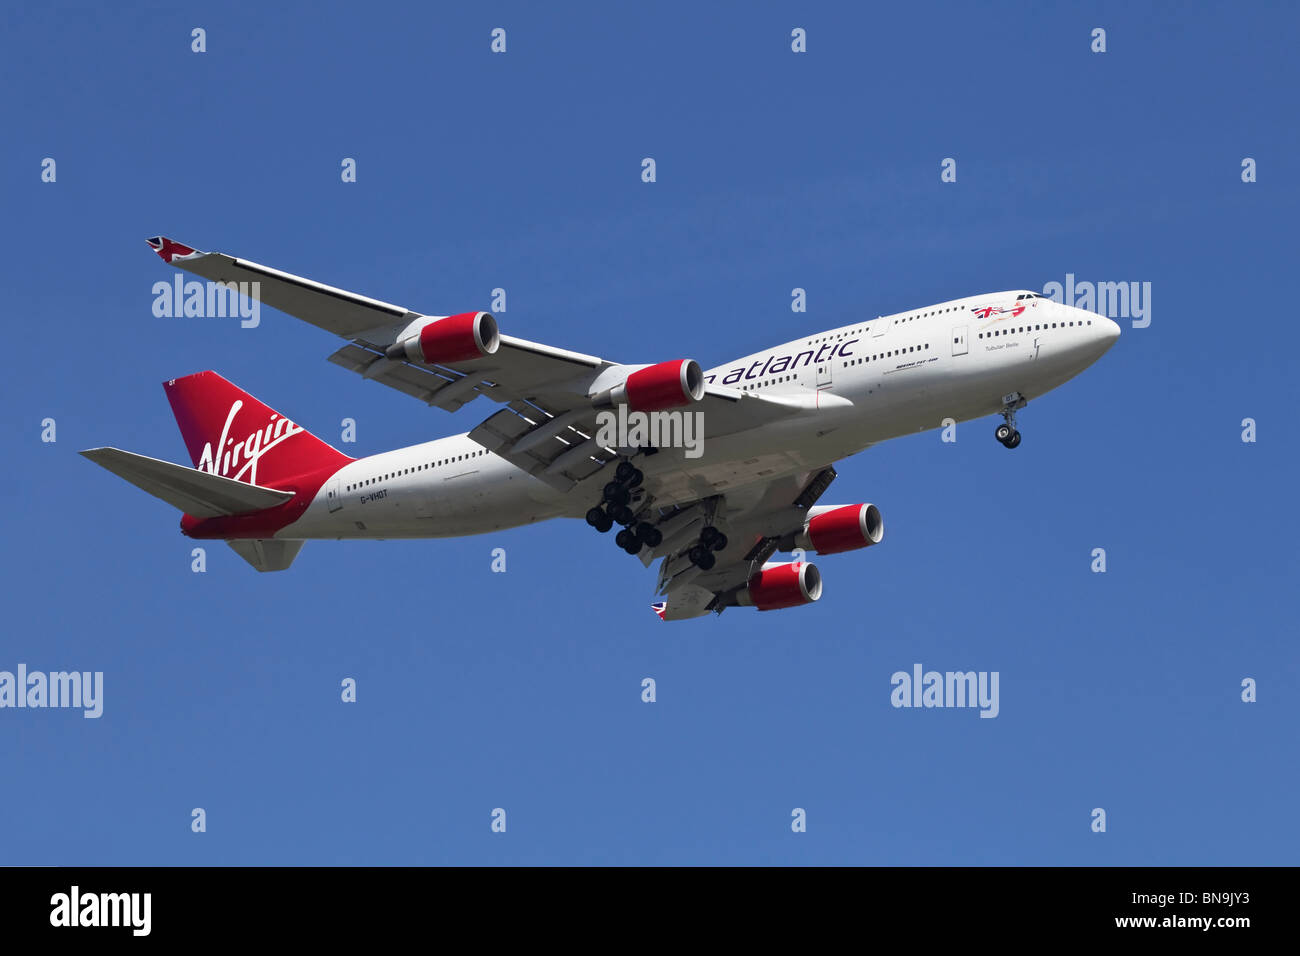 A Boeing B747 of the UK airline Virgin Atlantic Airways on final approach Stock Photo